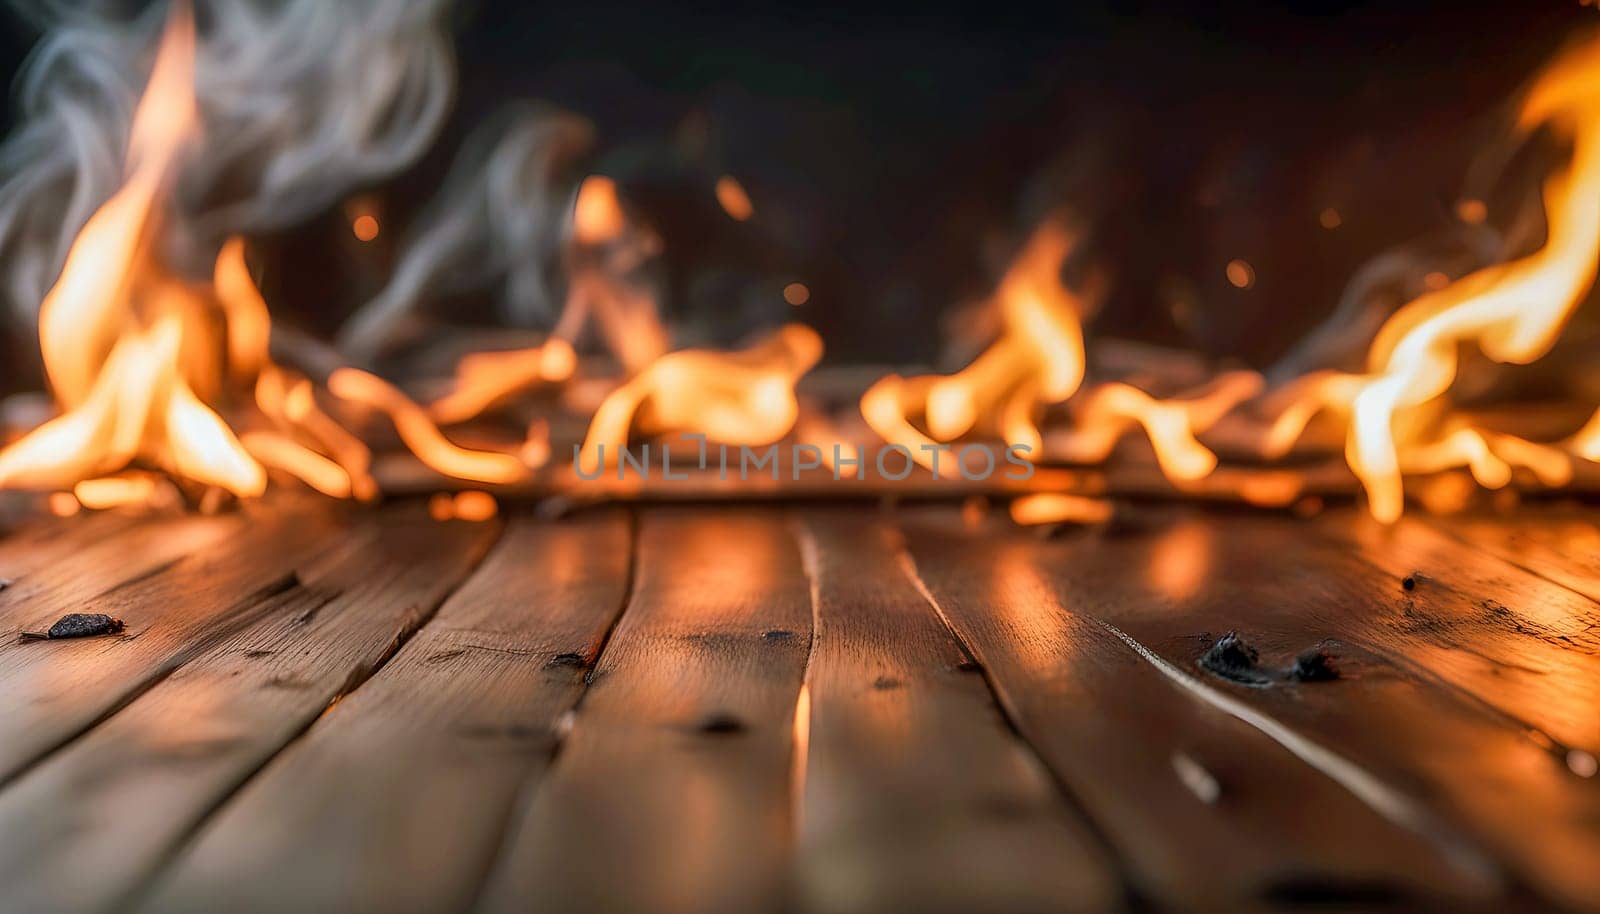 Close-up of Flames on Wooden Surface by rostik924